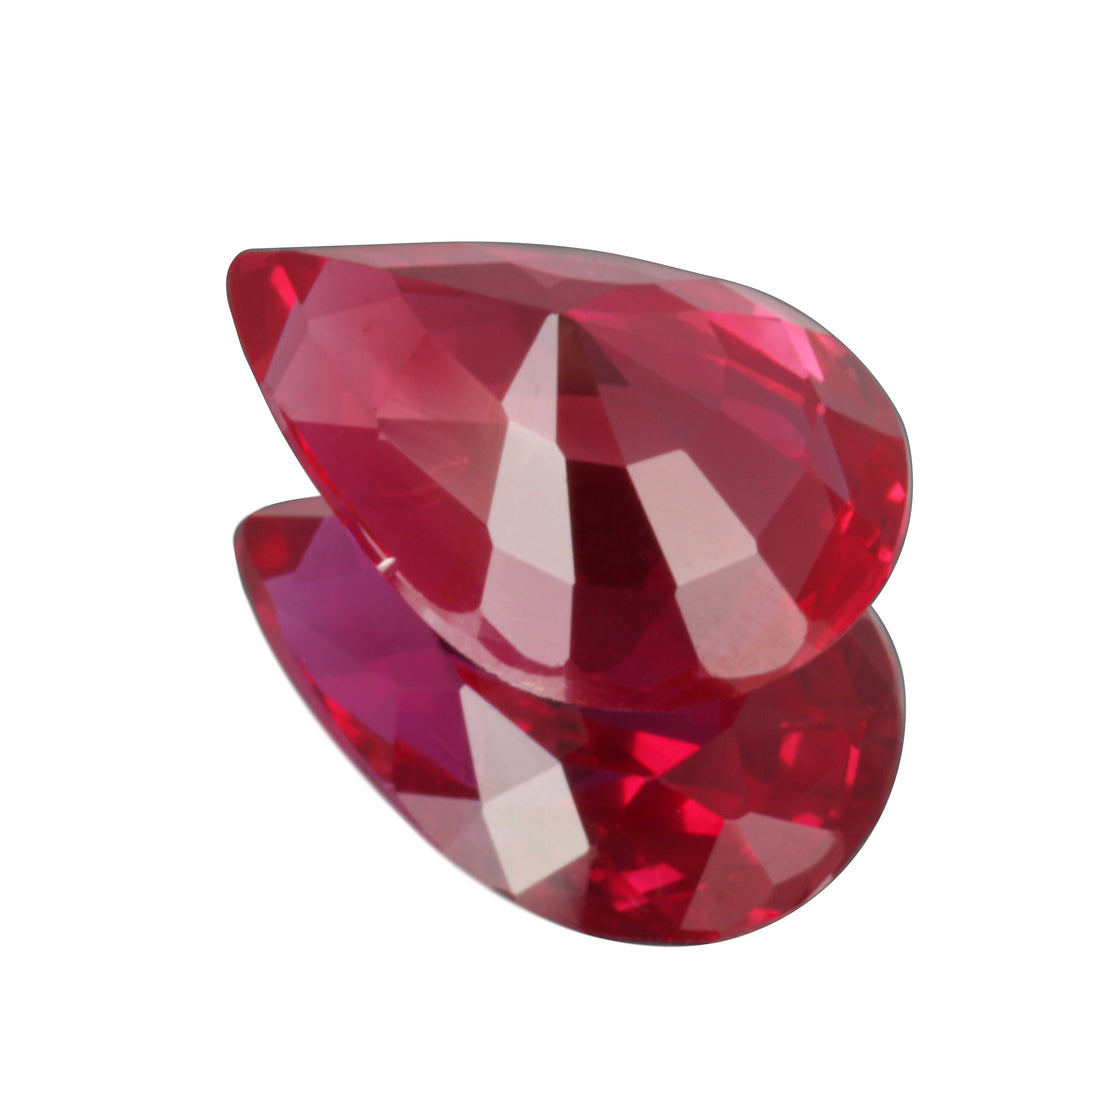 Ruby 1.17 ct